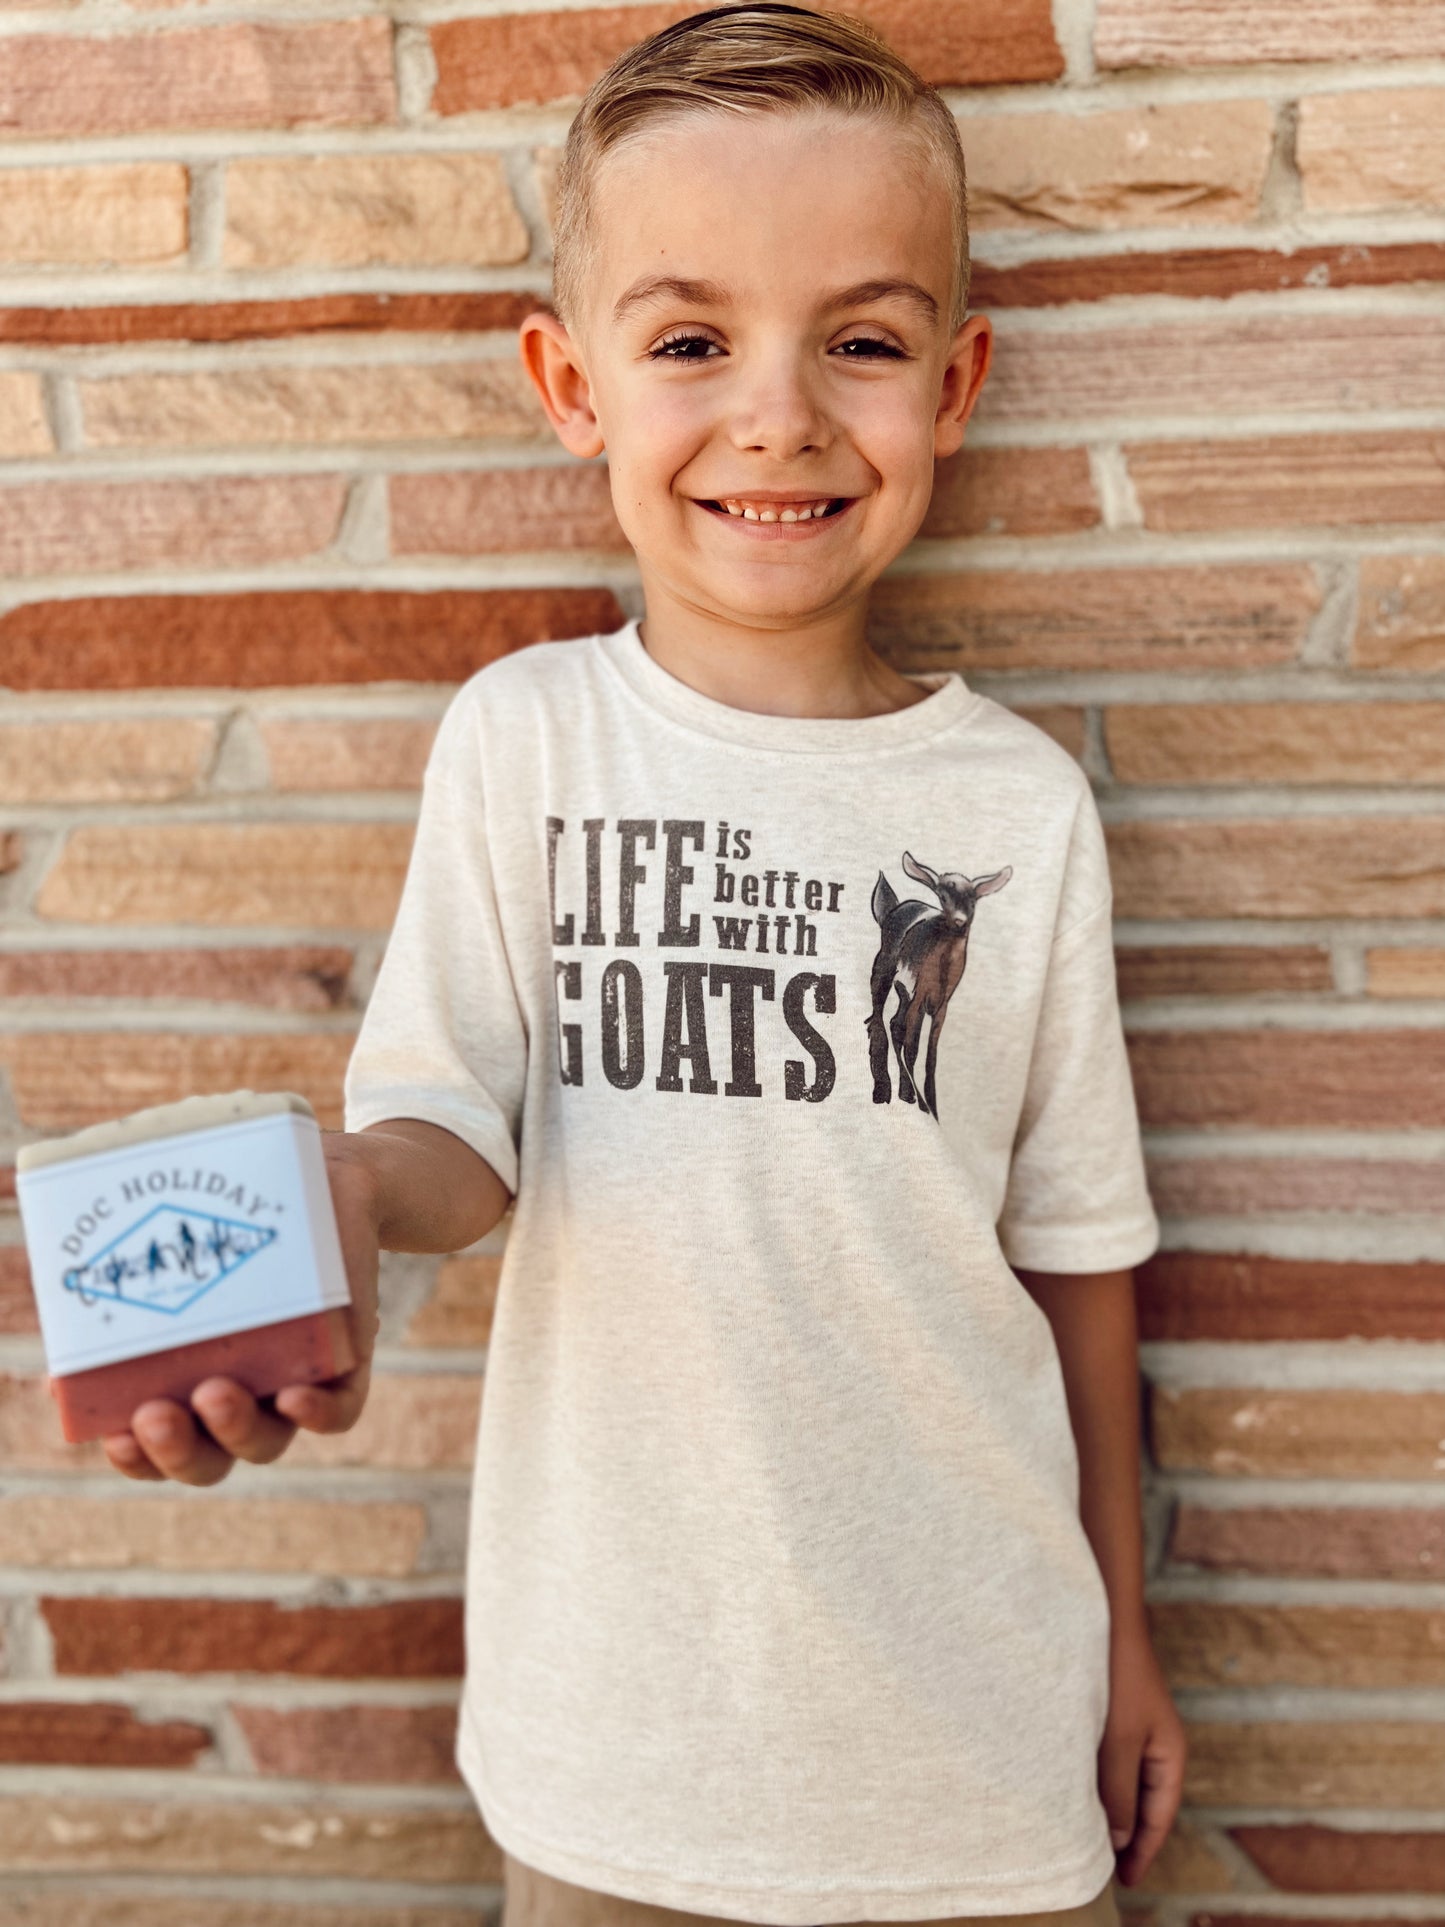 Life is better with Goats kids tee